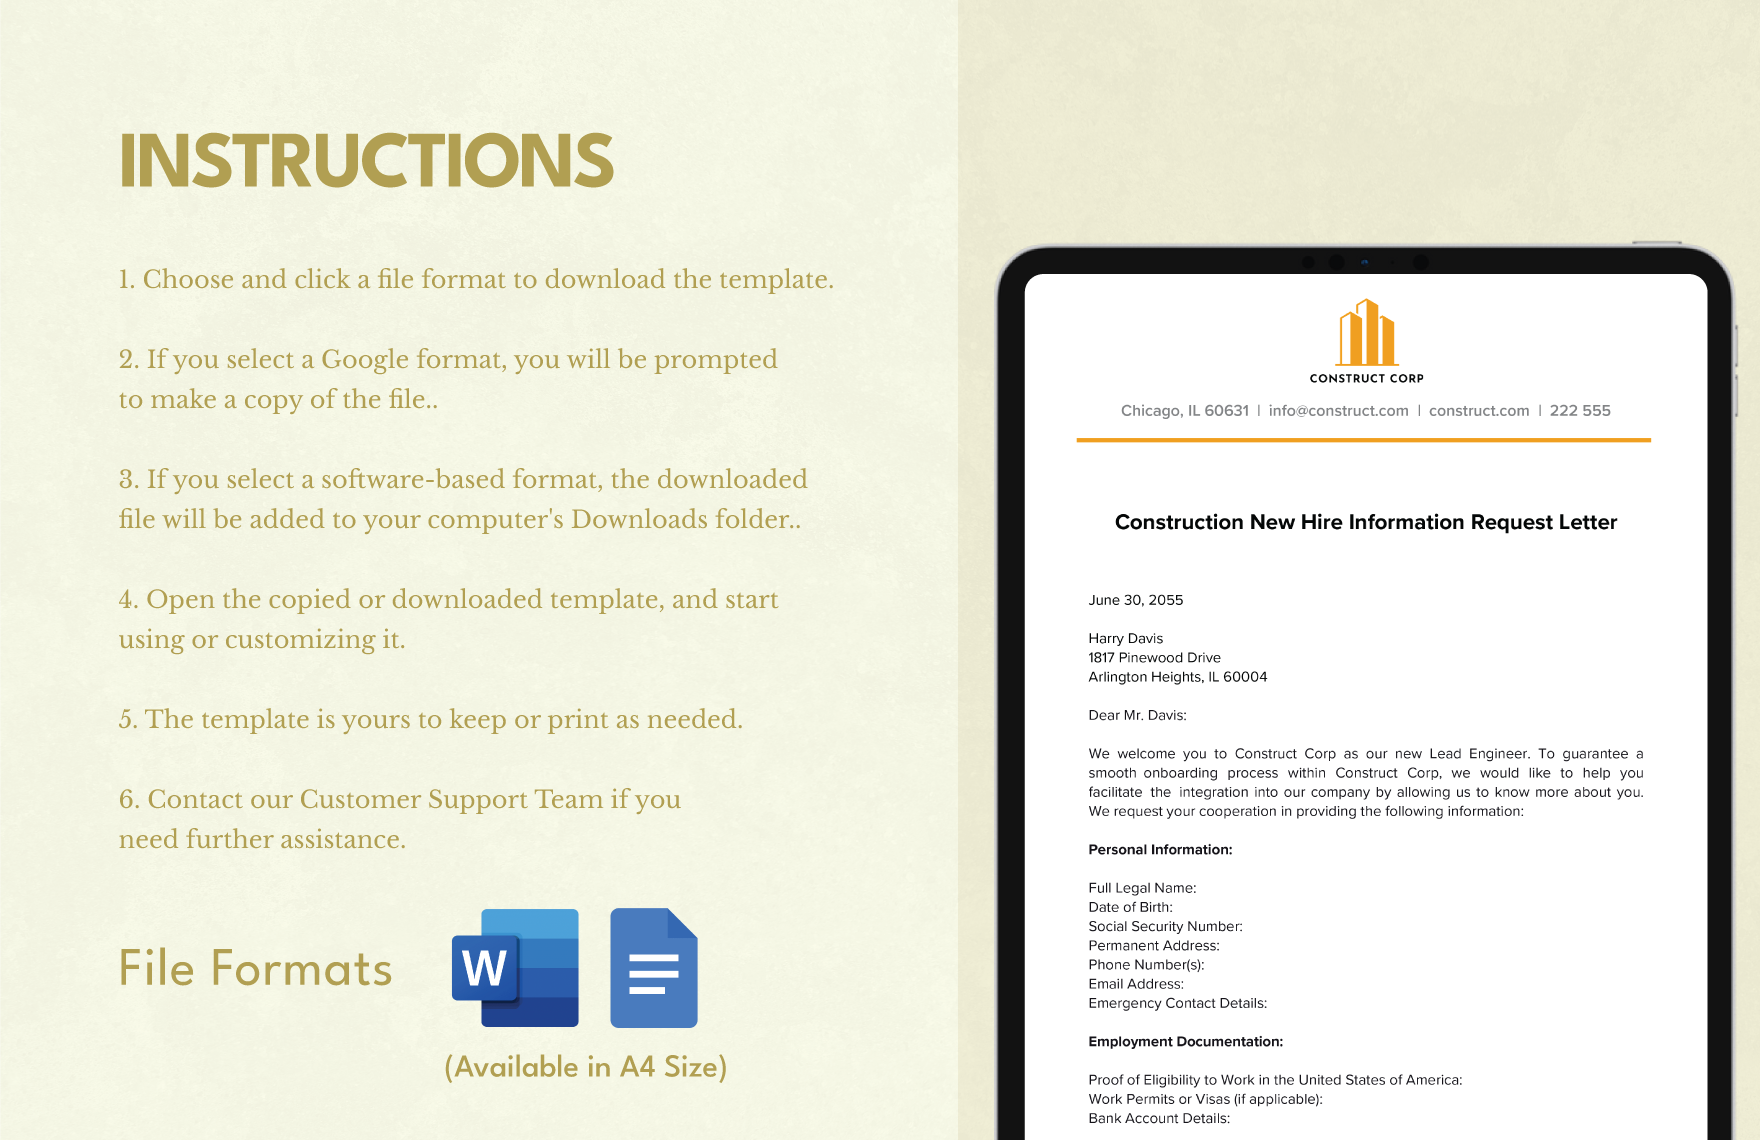 Construction New Hire Information Request Letter Template